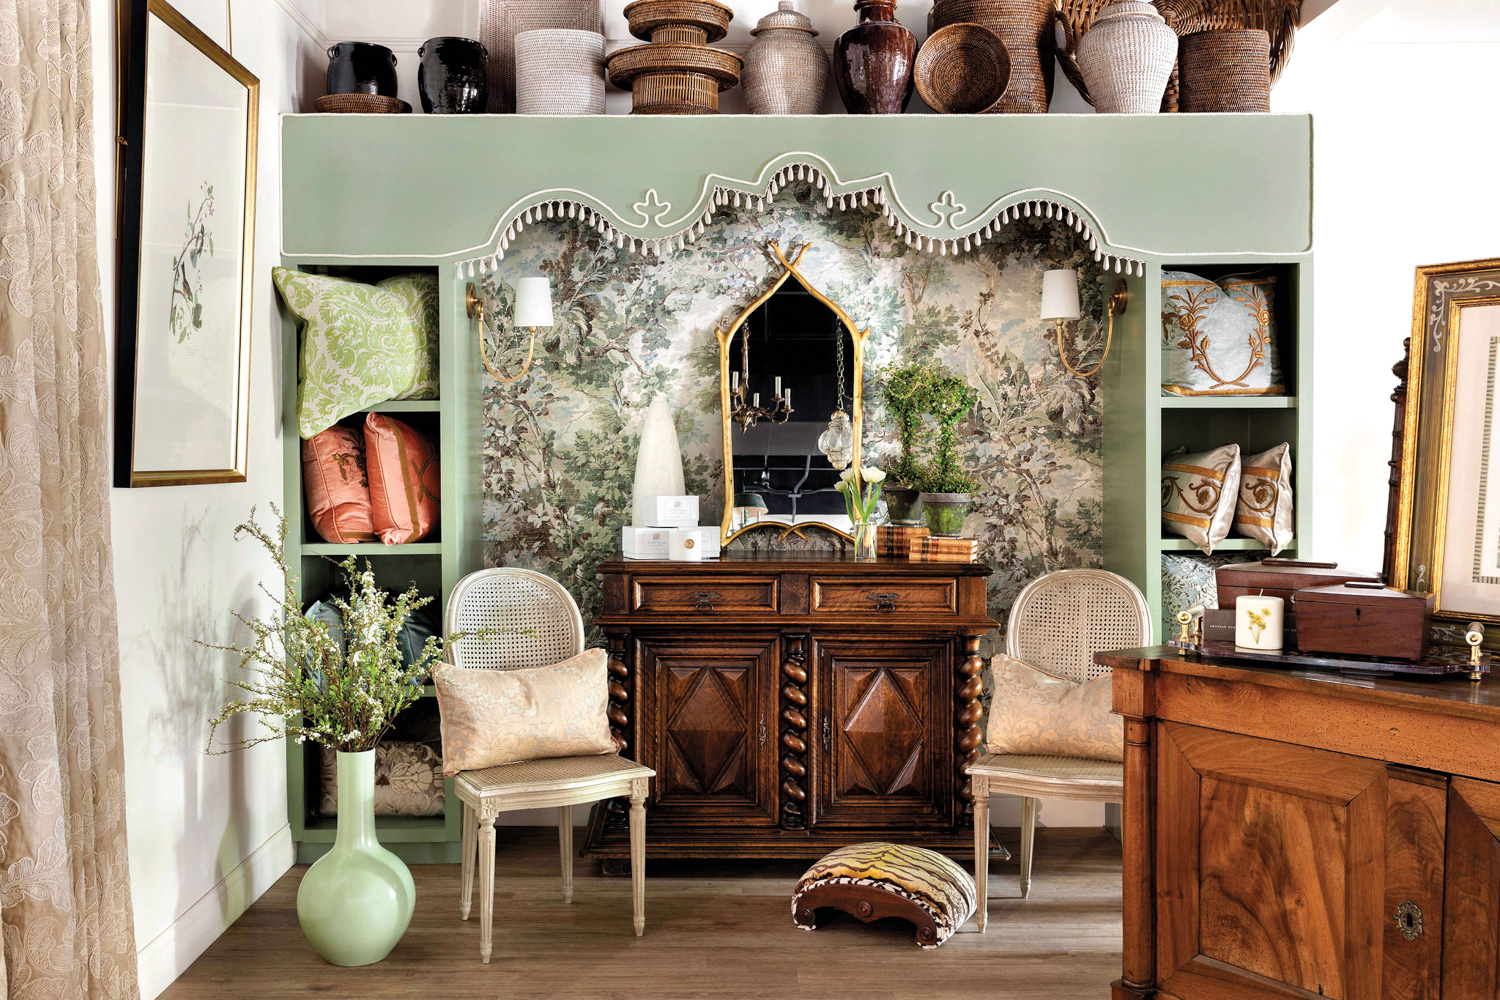 A dark-wood console sits in an alcove in a leafy-patterned wallpaper framed by built-in shelves by Debbie Mathews